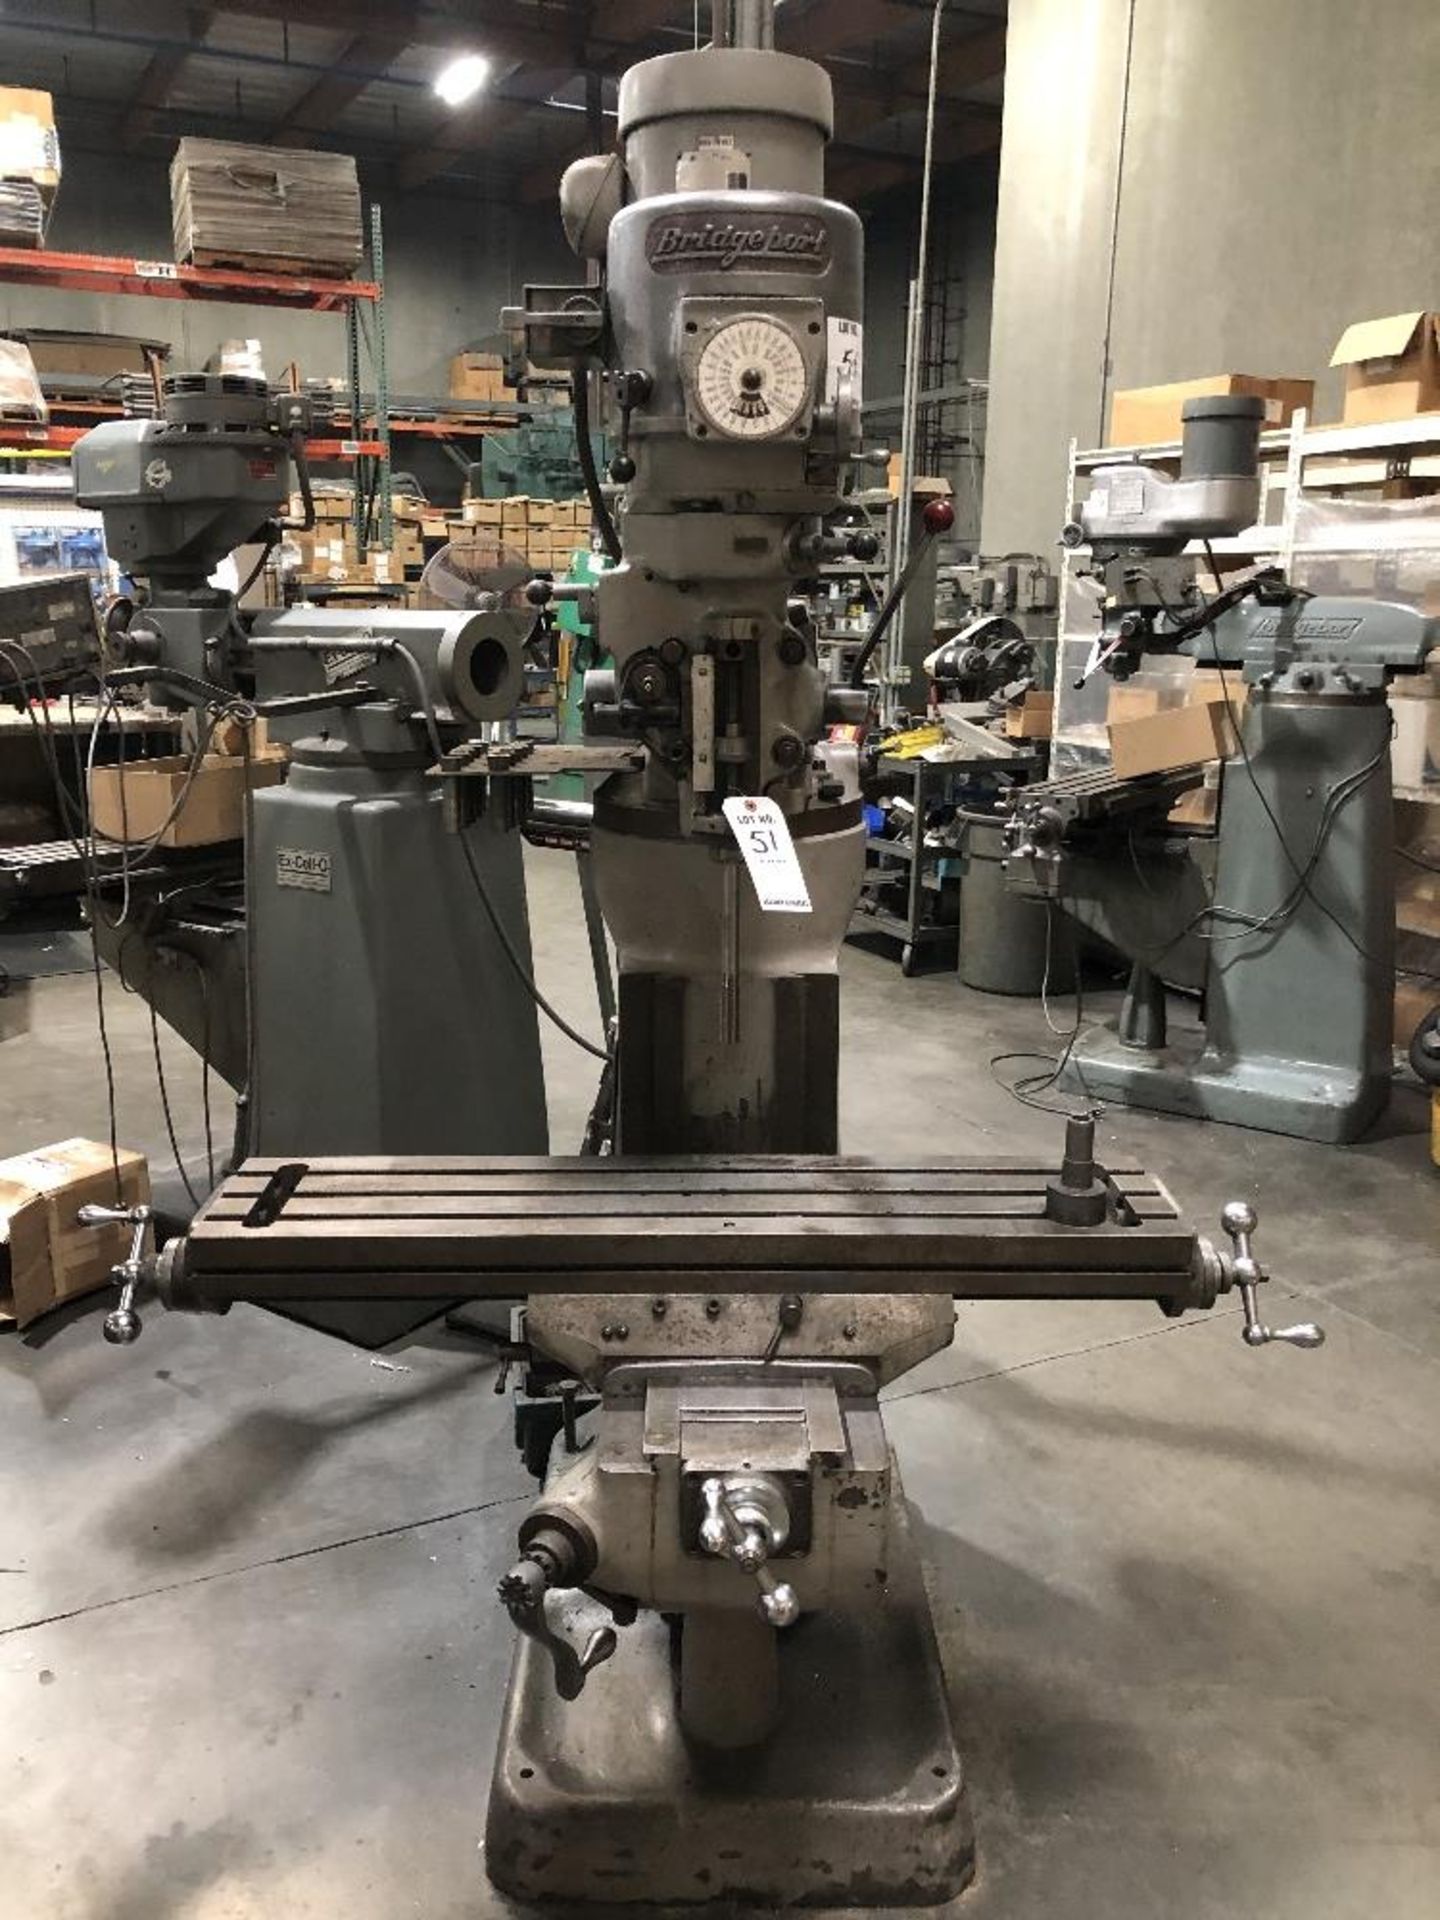 Bridgeport Mill 1 1/2 HP, 48" T-Slot Table, 60-4,200 RPM, 10 Extra R-8 Collets S/N-137972